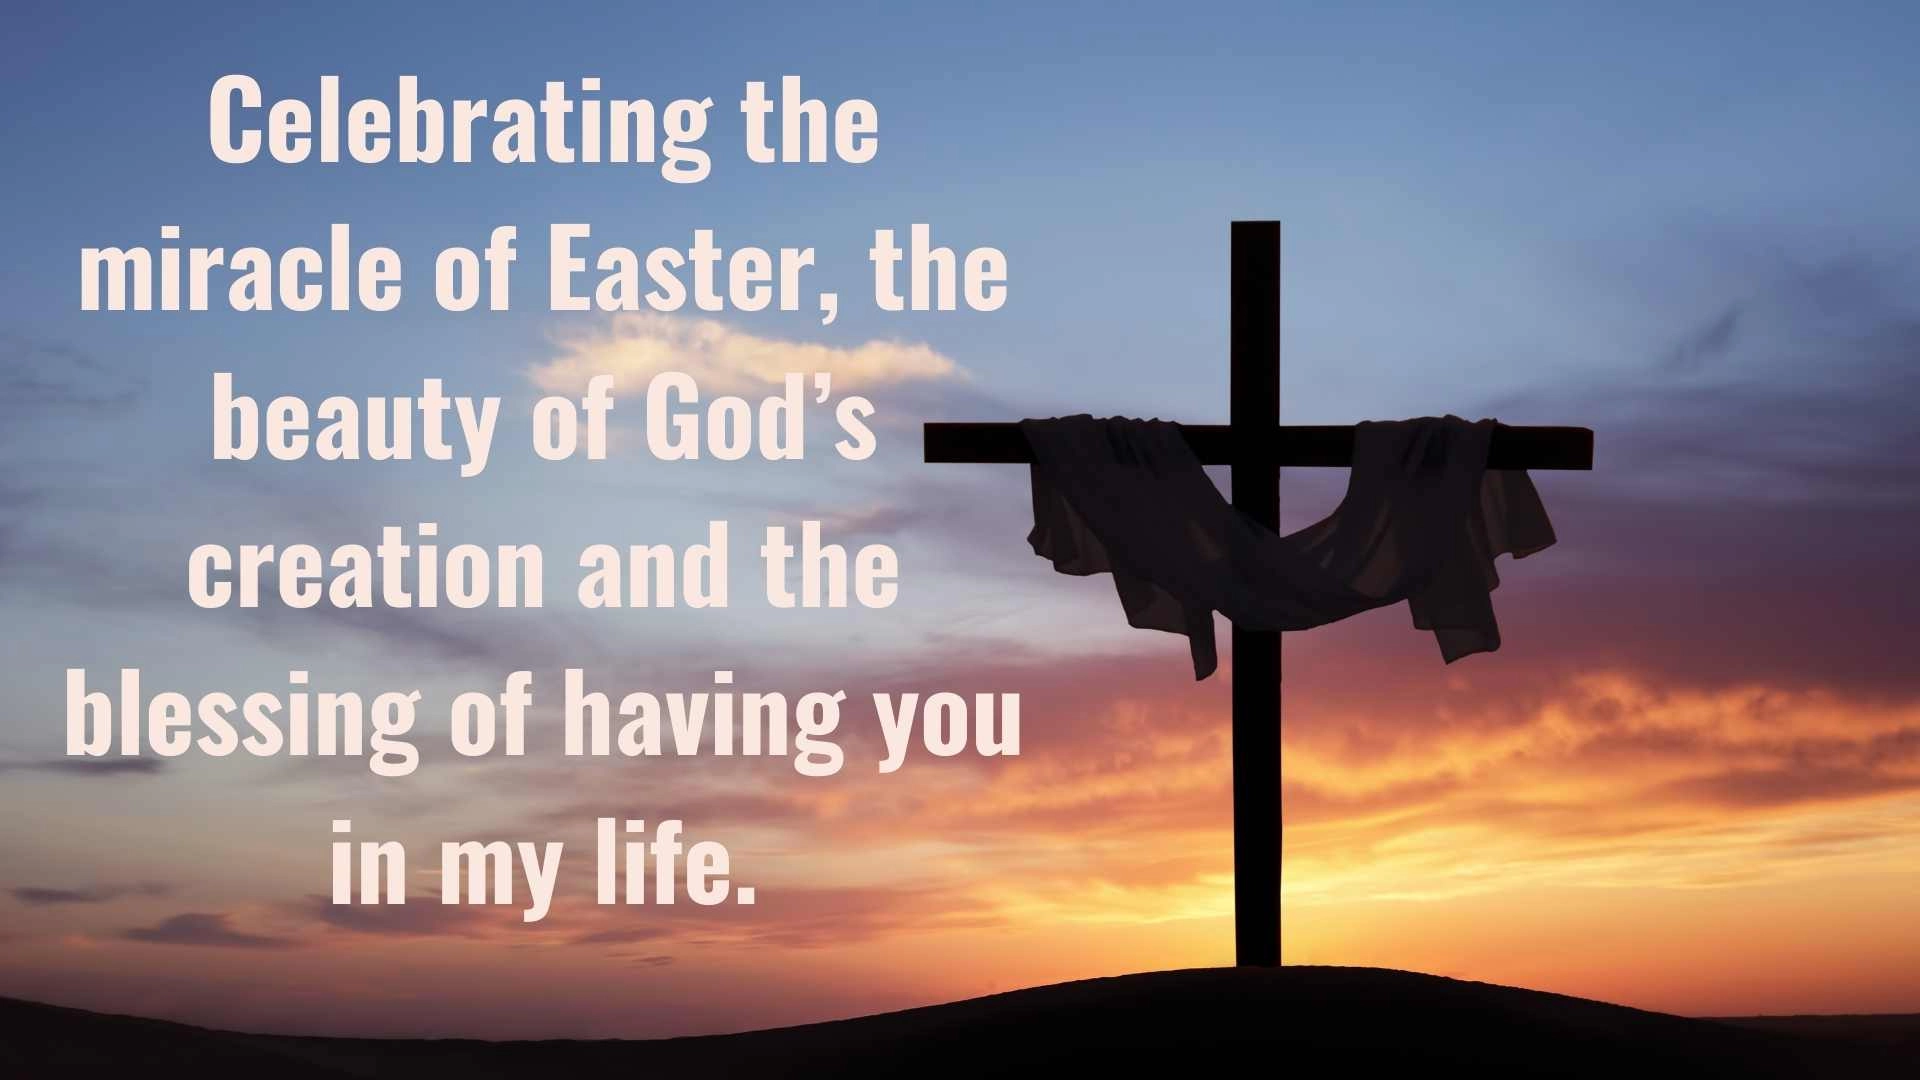 Christian Easter Images. Religious easter images. Free religious easter images. Beautiful easter pictures. Christian easter images 2022.